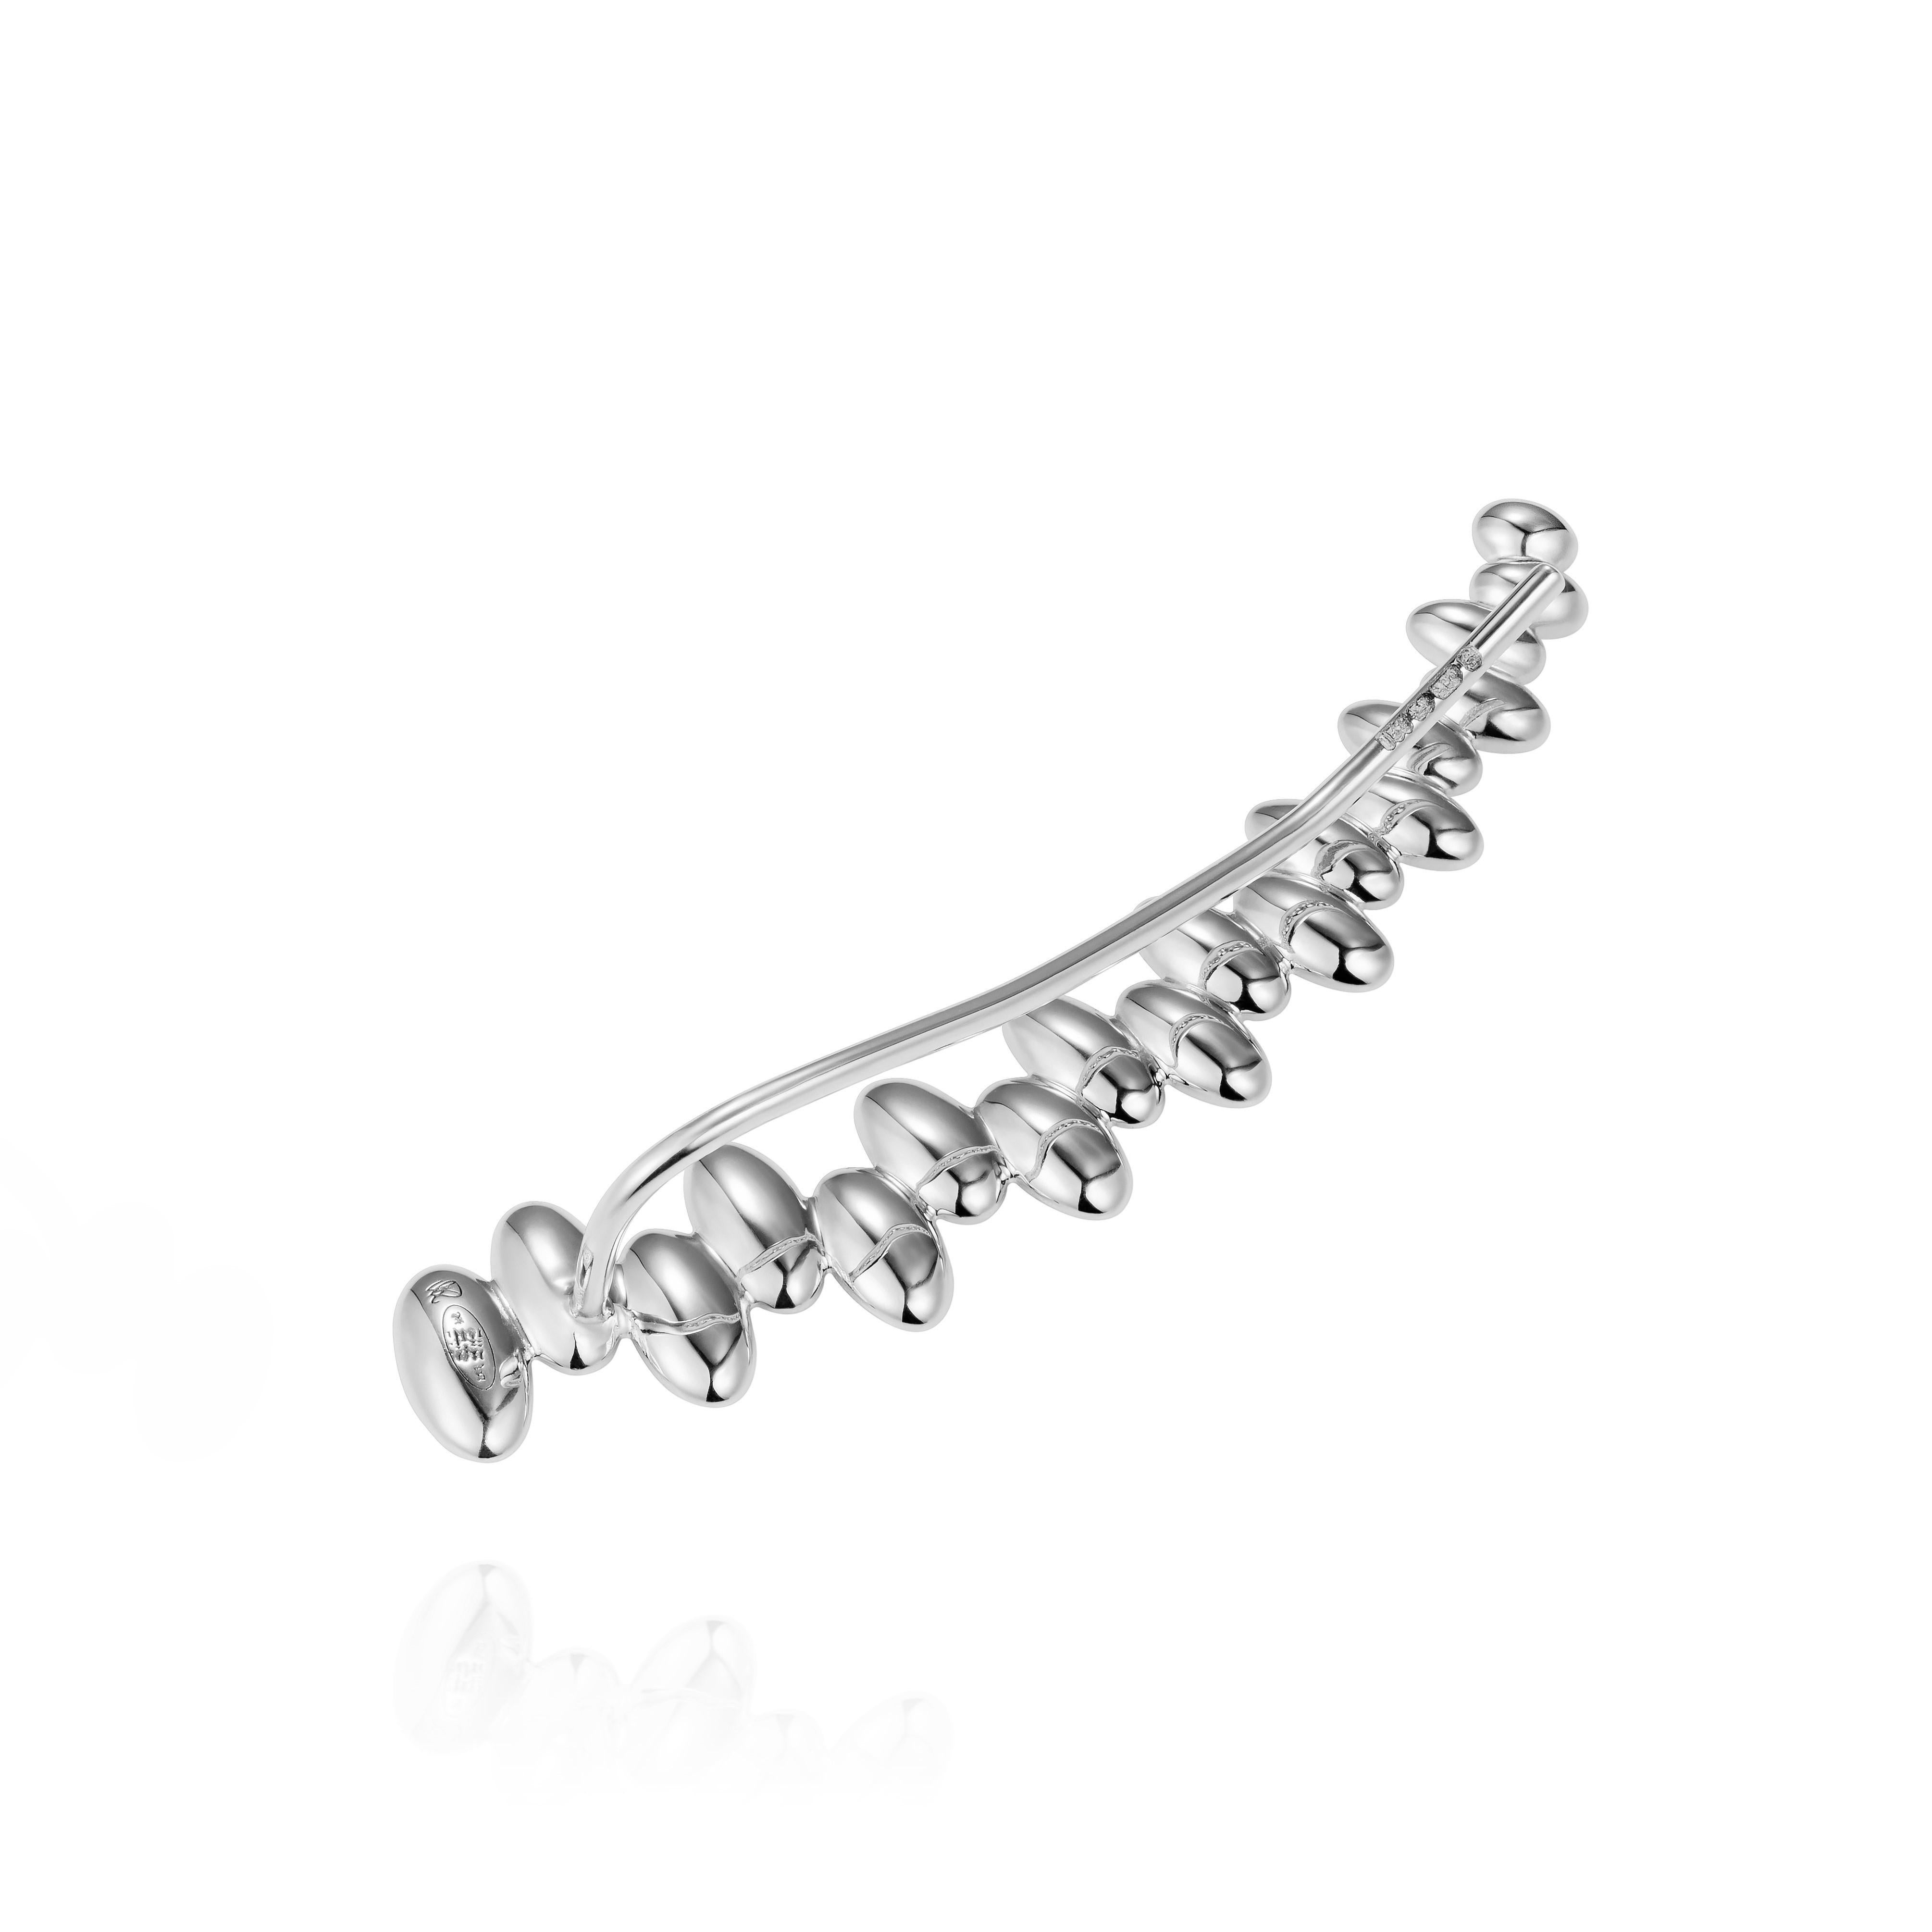 18 Karat White Gold Ear Cuff Earring

This 18 karat white gold ear cuff is part of the Skinny collection. This is a statement piece and a must have accessory. The average gold weight 2.8 grams.  

This style of ear cuff is for the right ear.